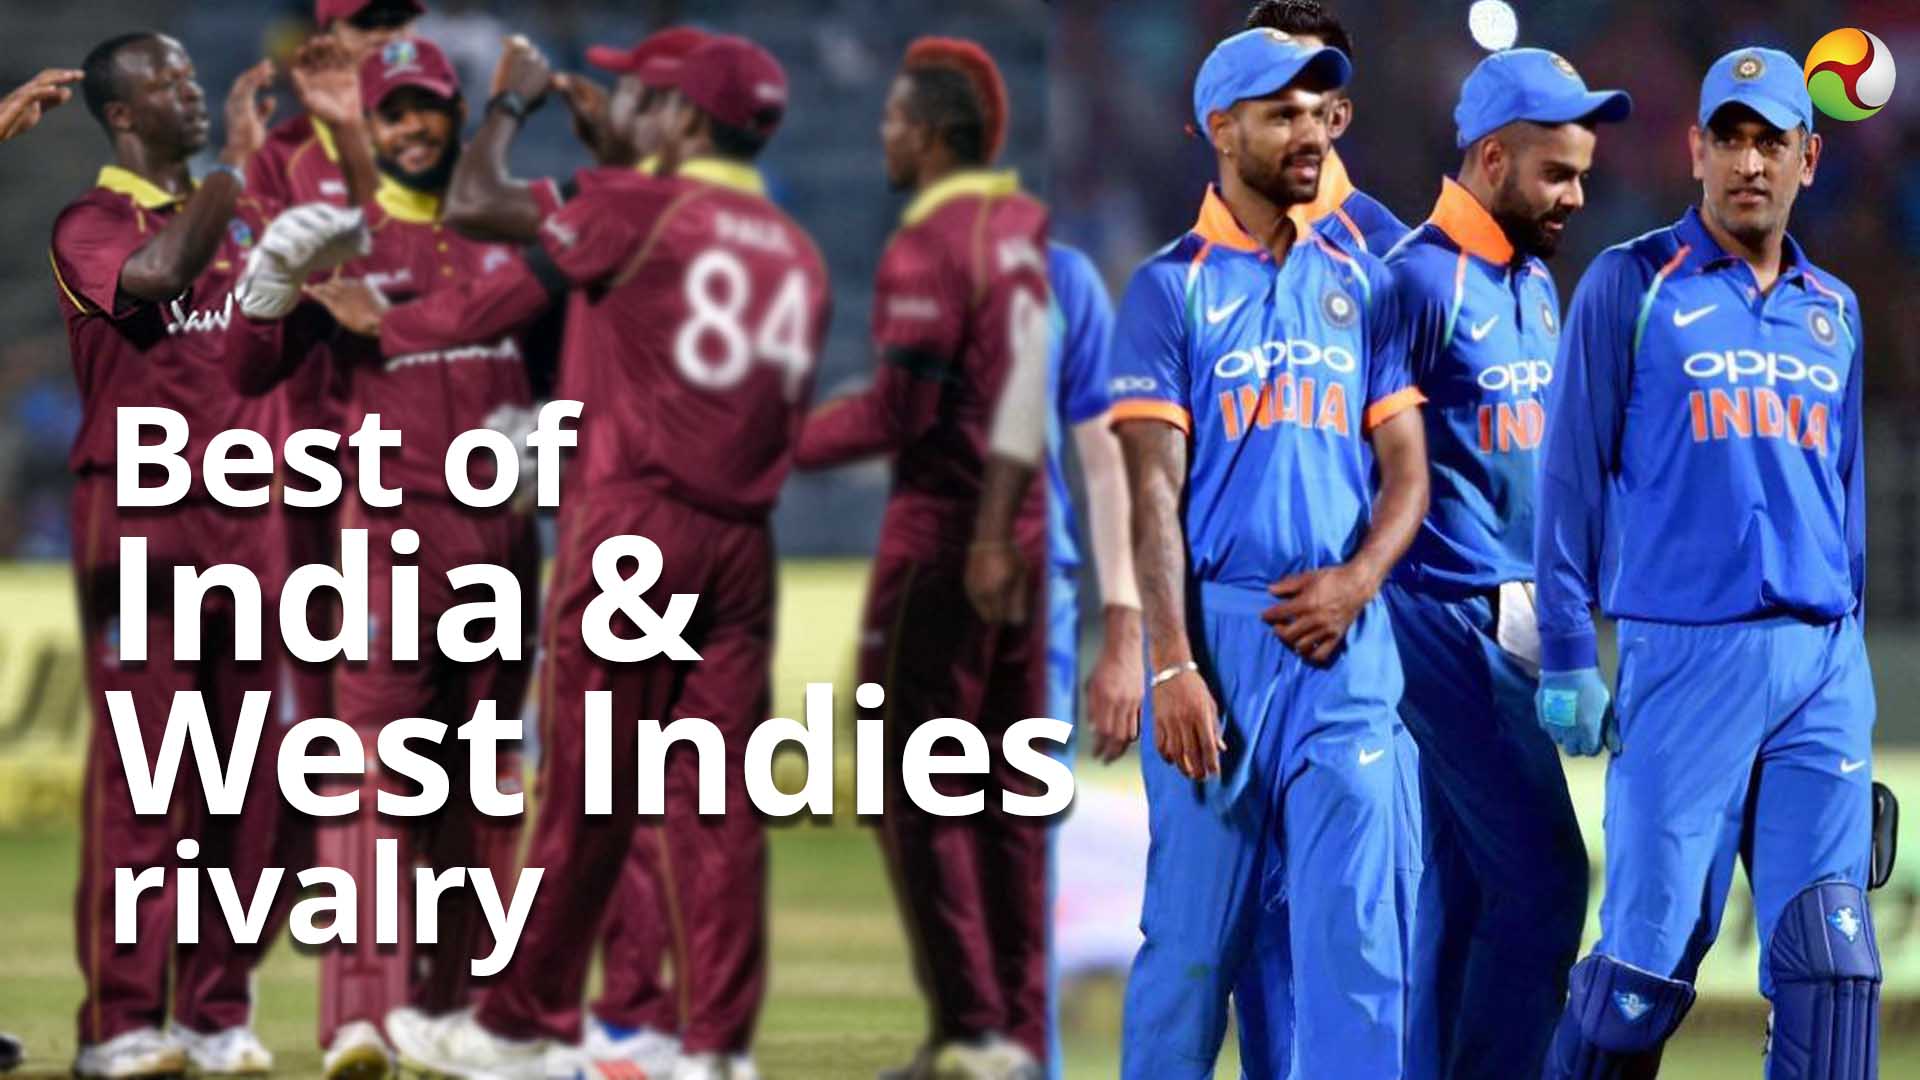 India, West Indies, Cricket, World Cup, ICC, Match, Rivalry